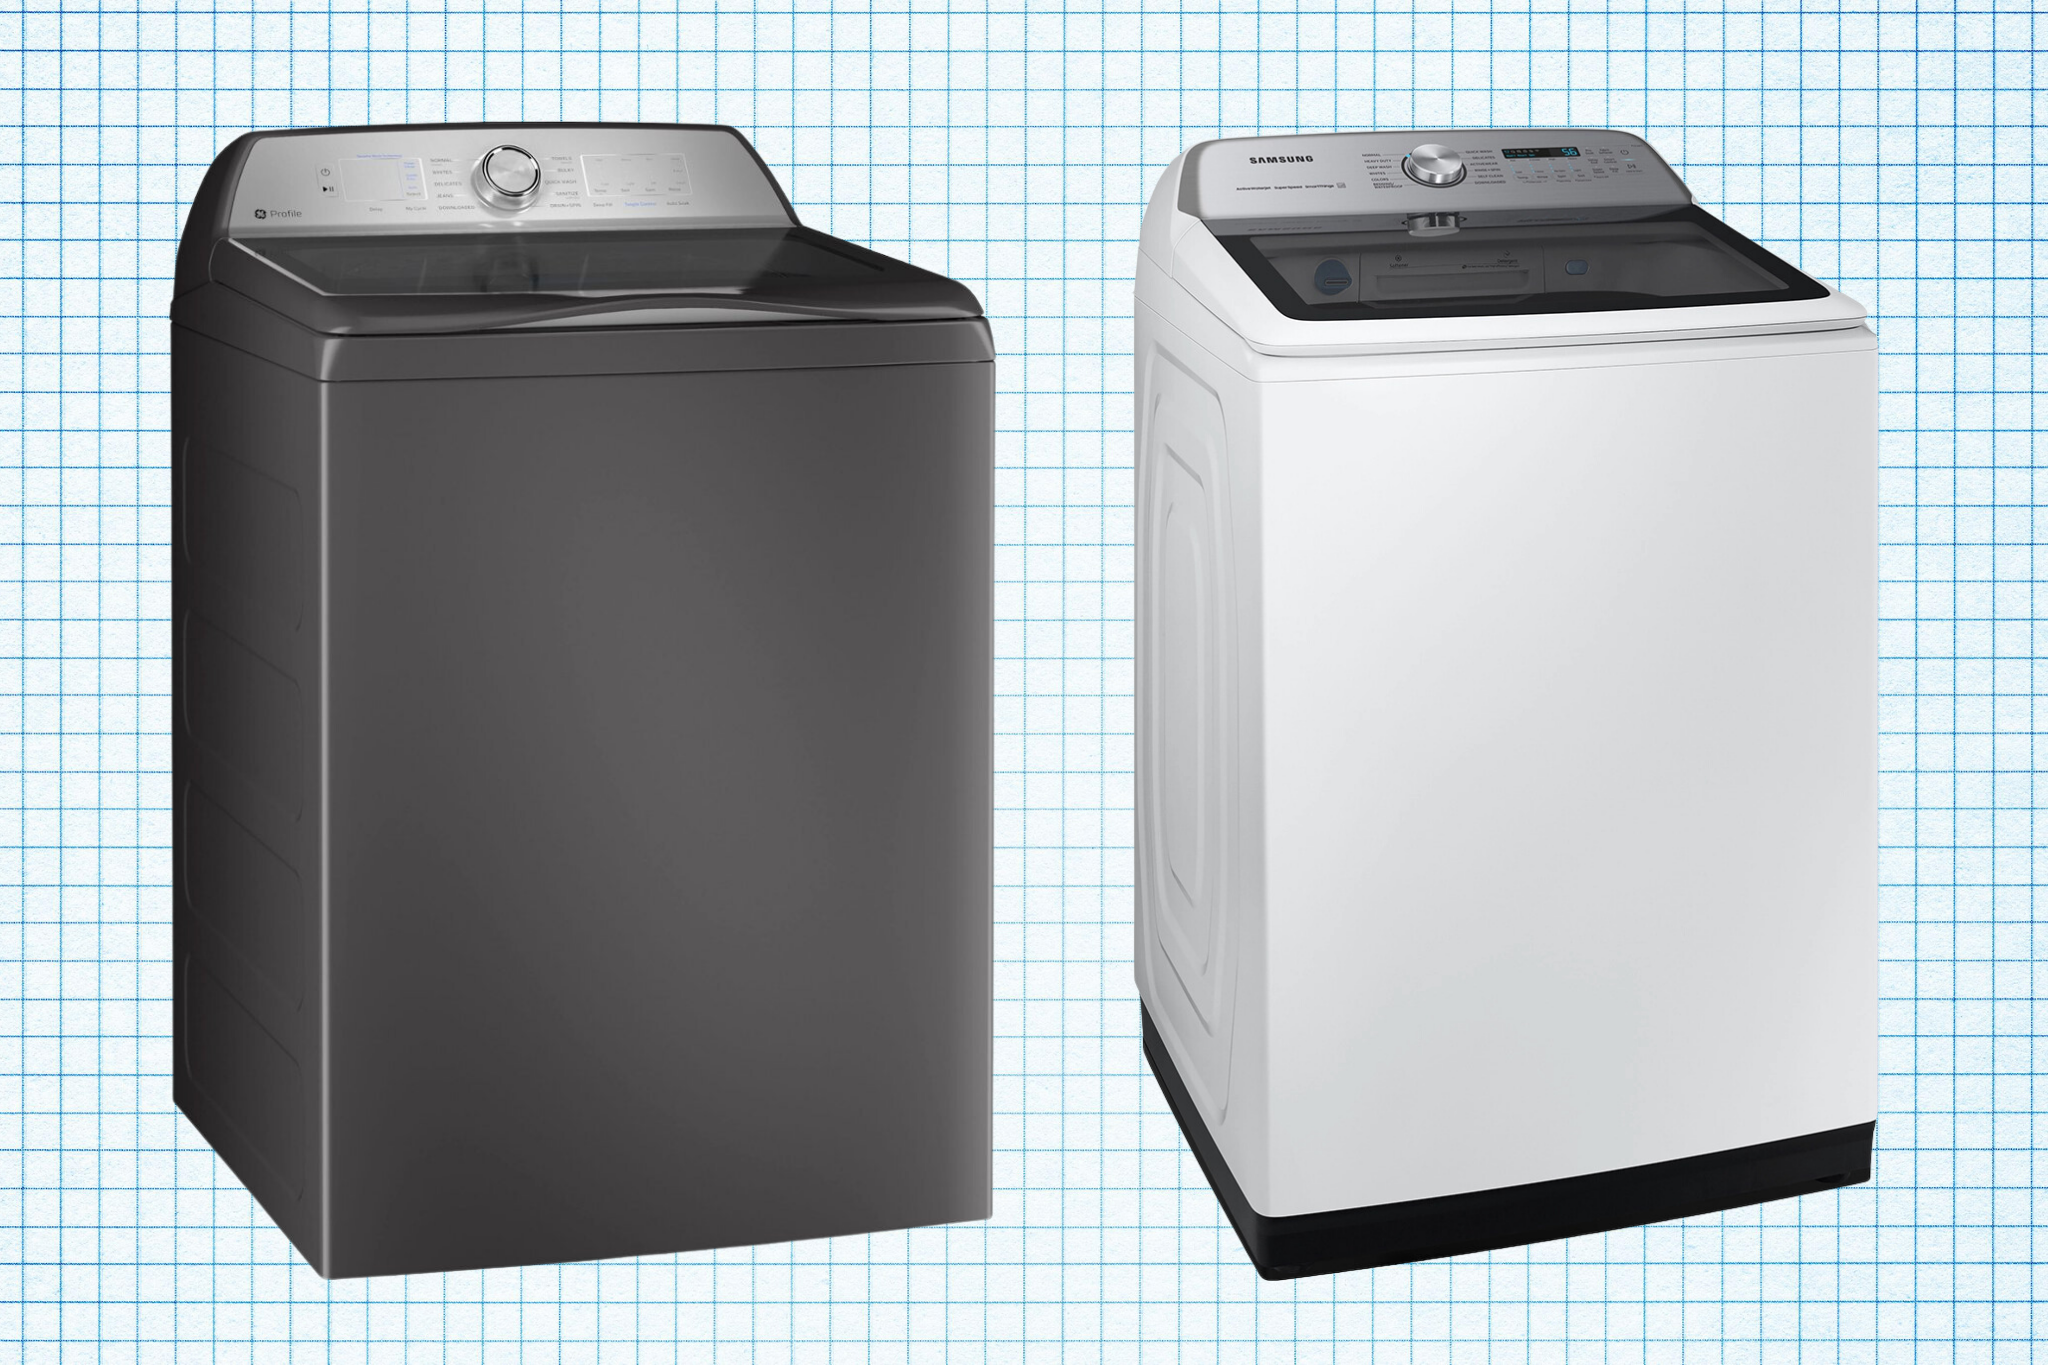 GE PTW600BSRWS Top-Load Washer and Samsung WA51A5505AW ActiveWave Top-Load Washer against a blue-on-white graph paper background. Lead image for best top load washer